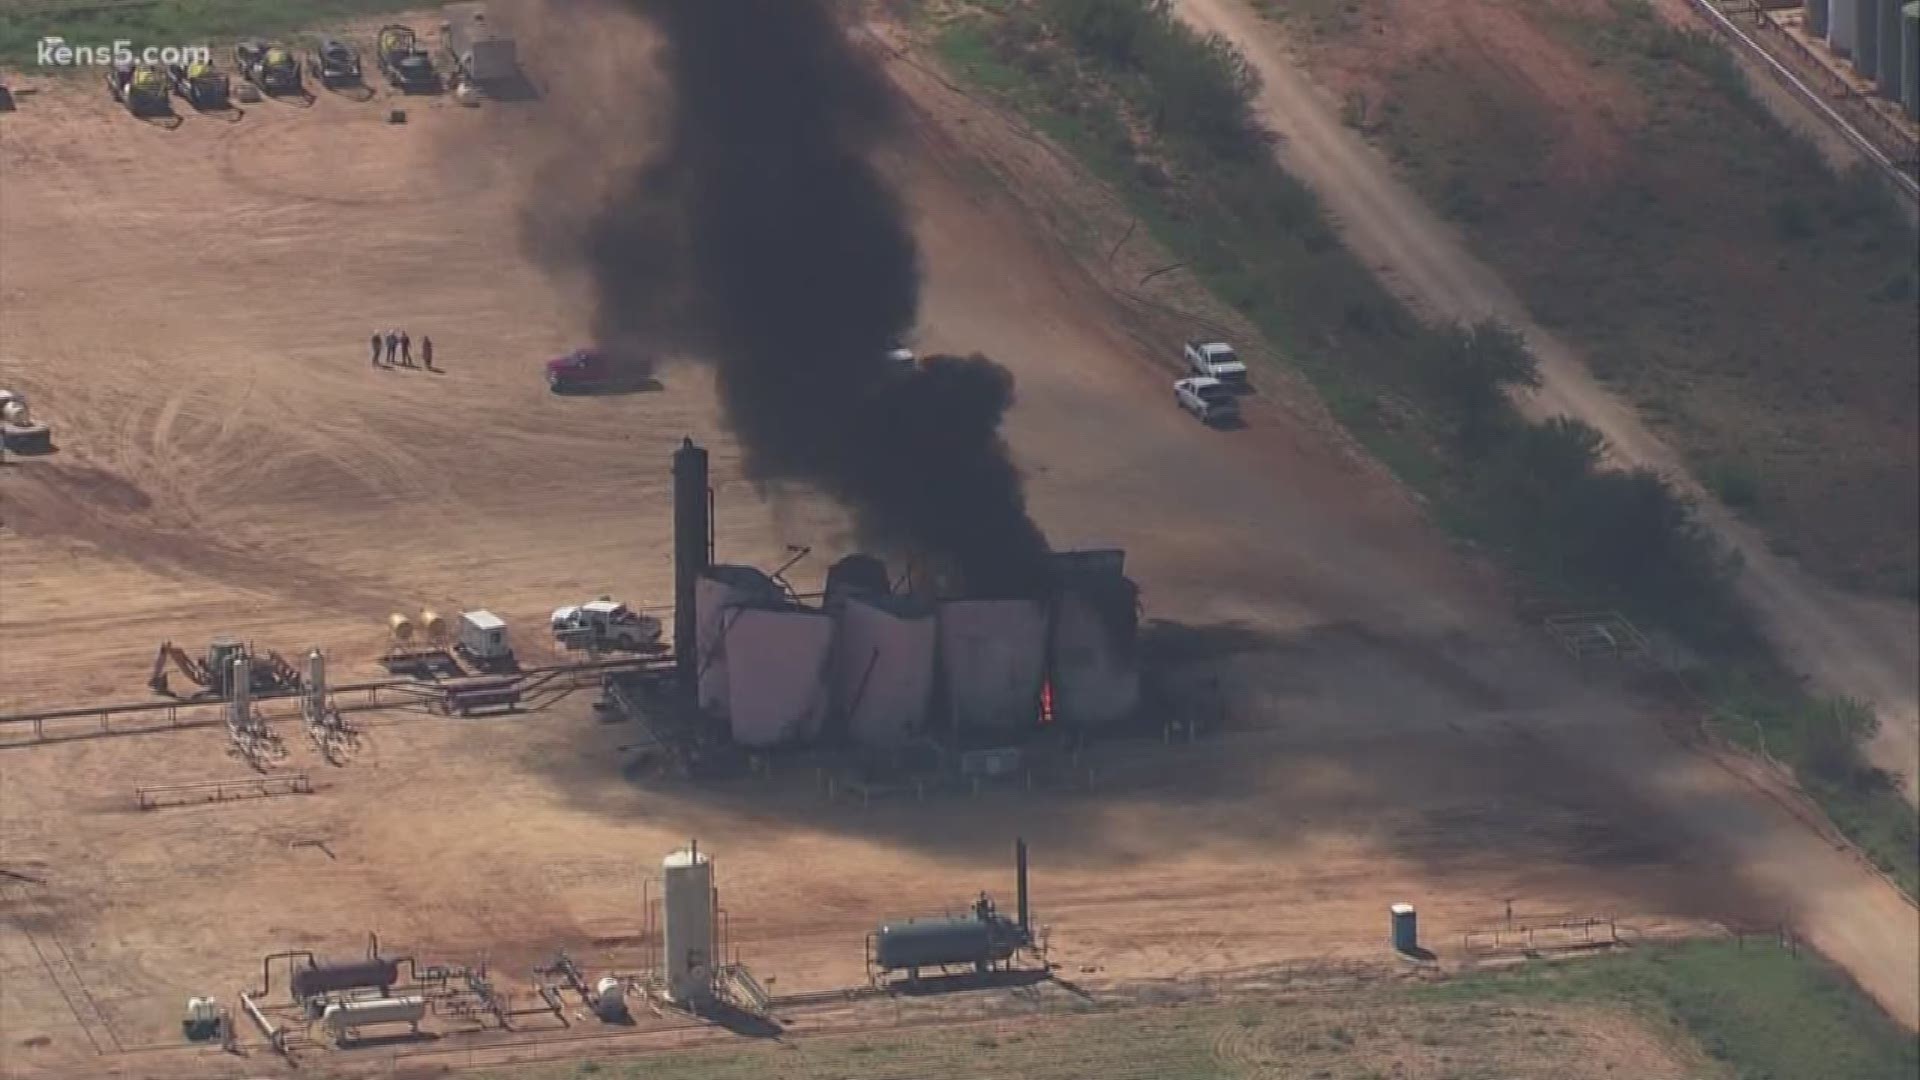 Two oilfield workers were airlifted from the scene for treatment to injuries sustained.